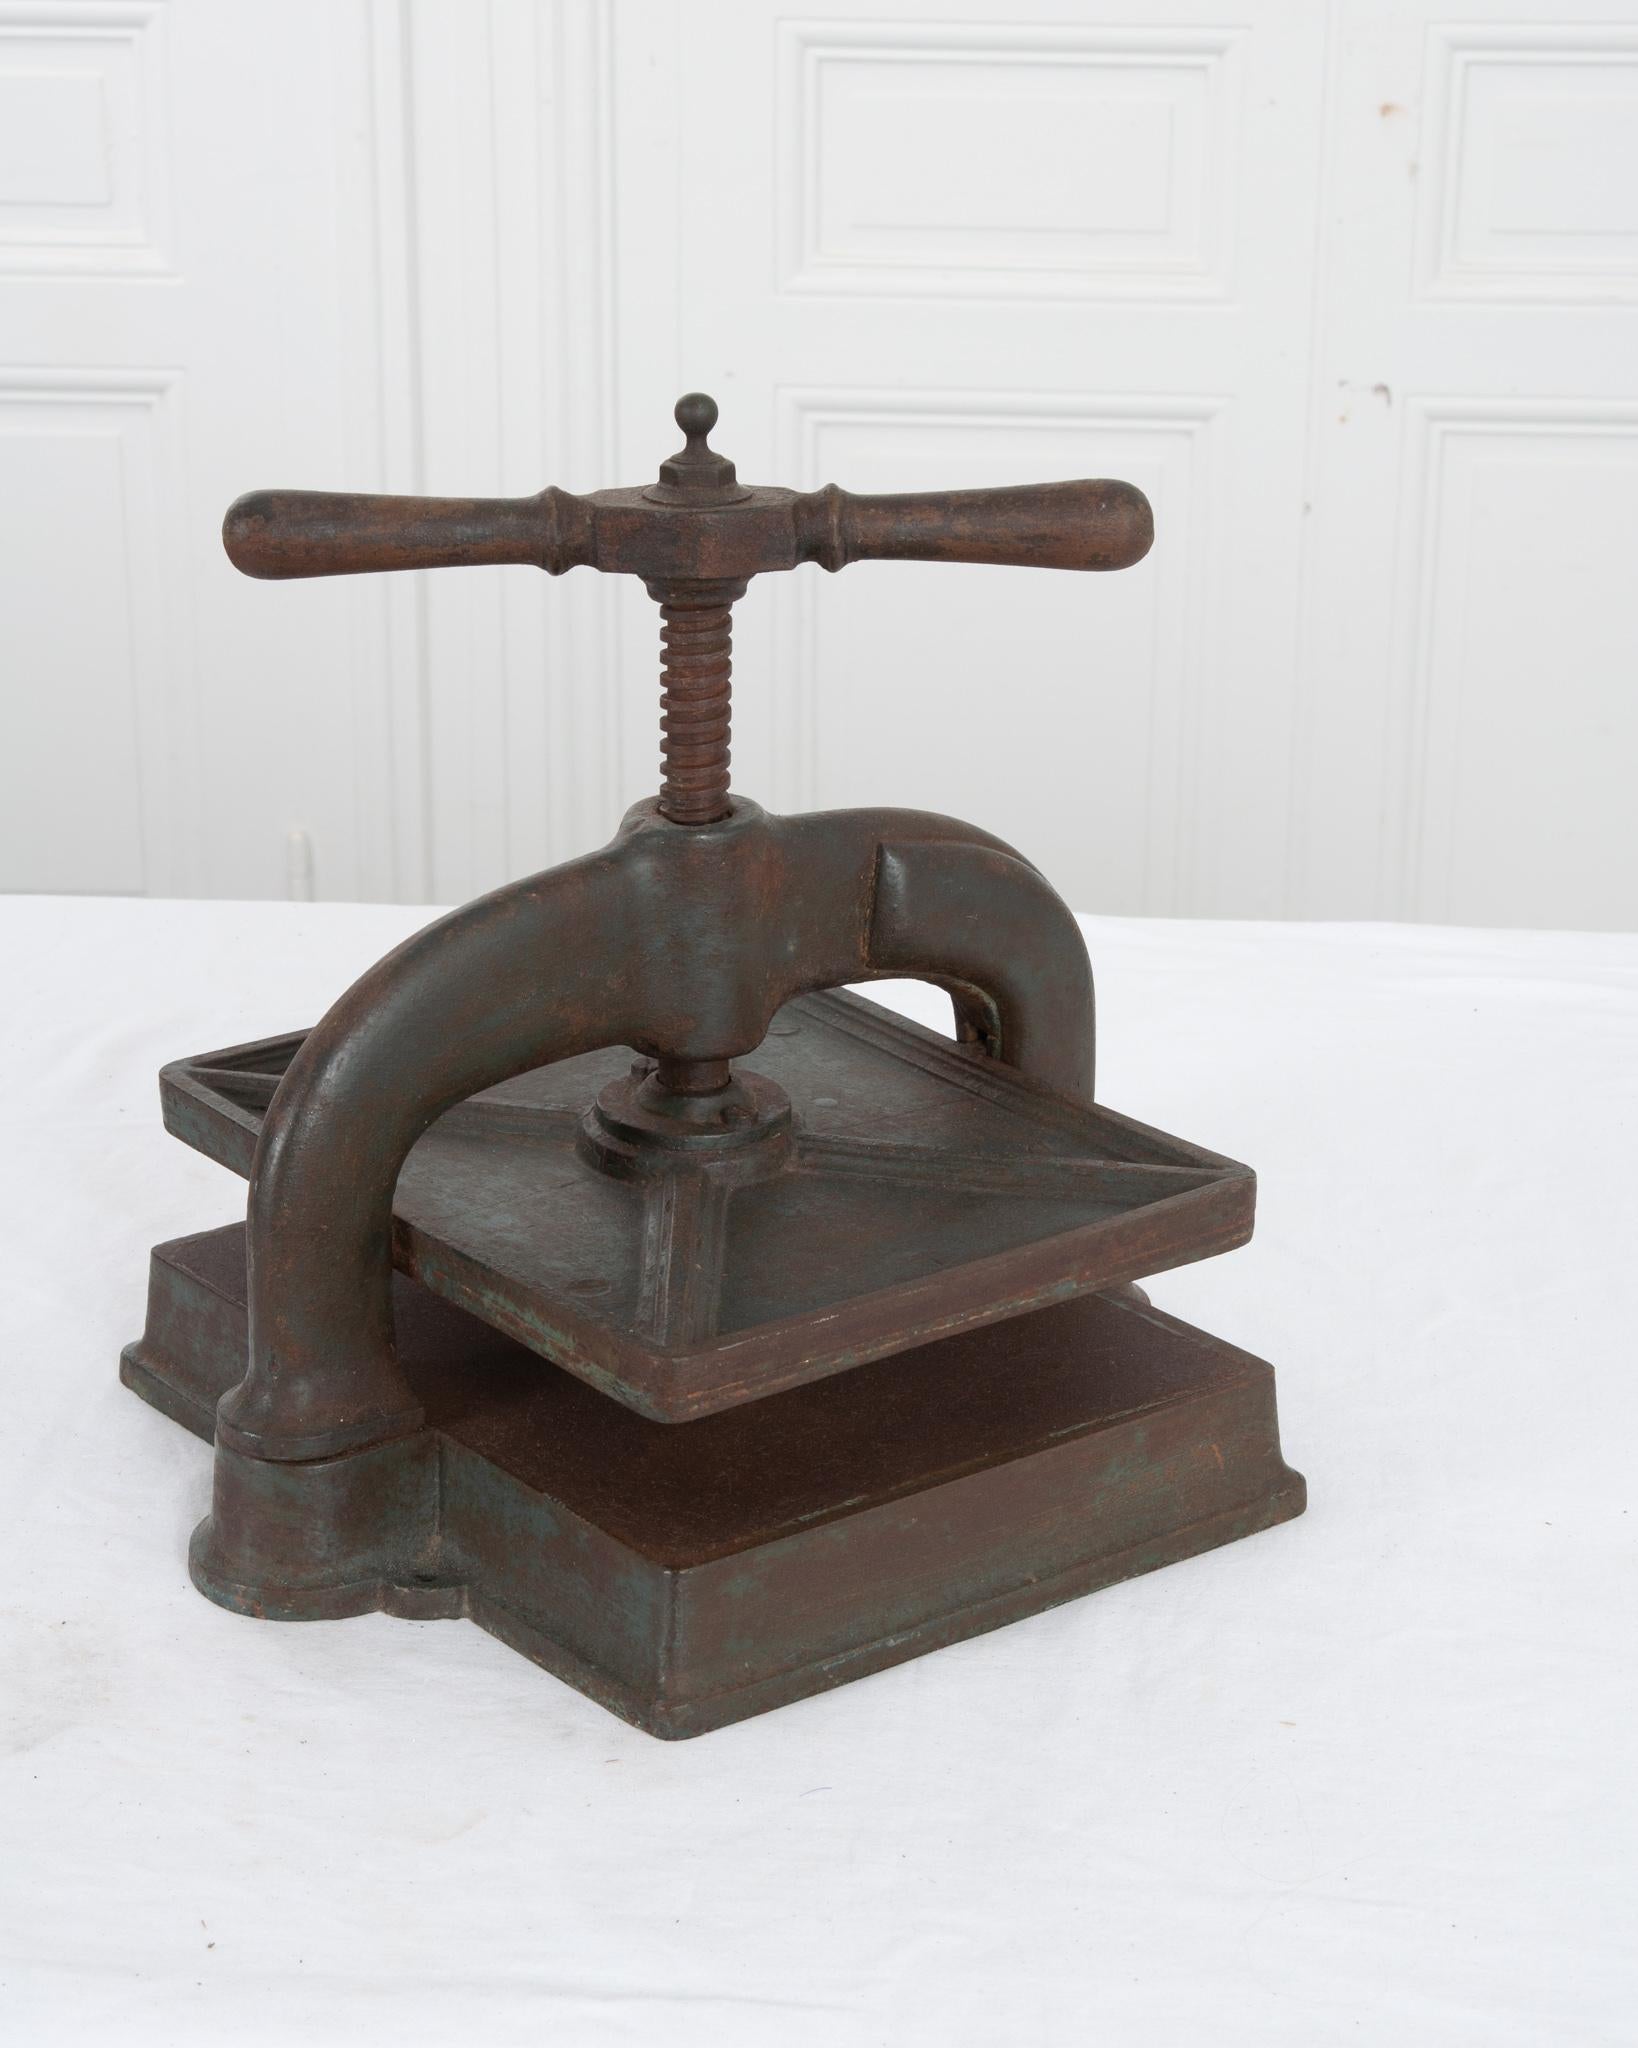 This antique paper binding press was forged in 19th century France. The classic 